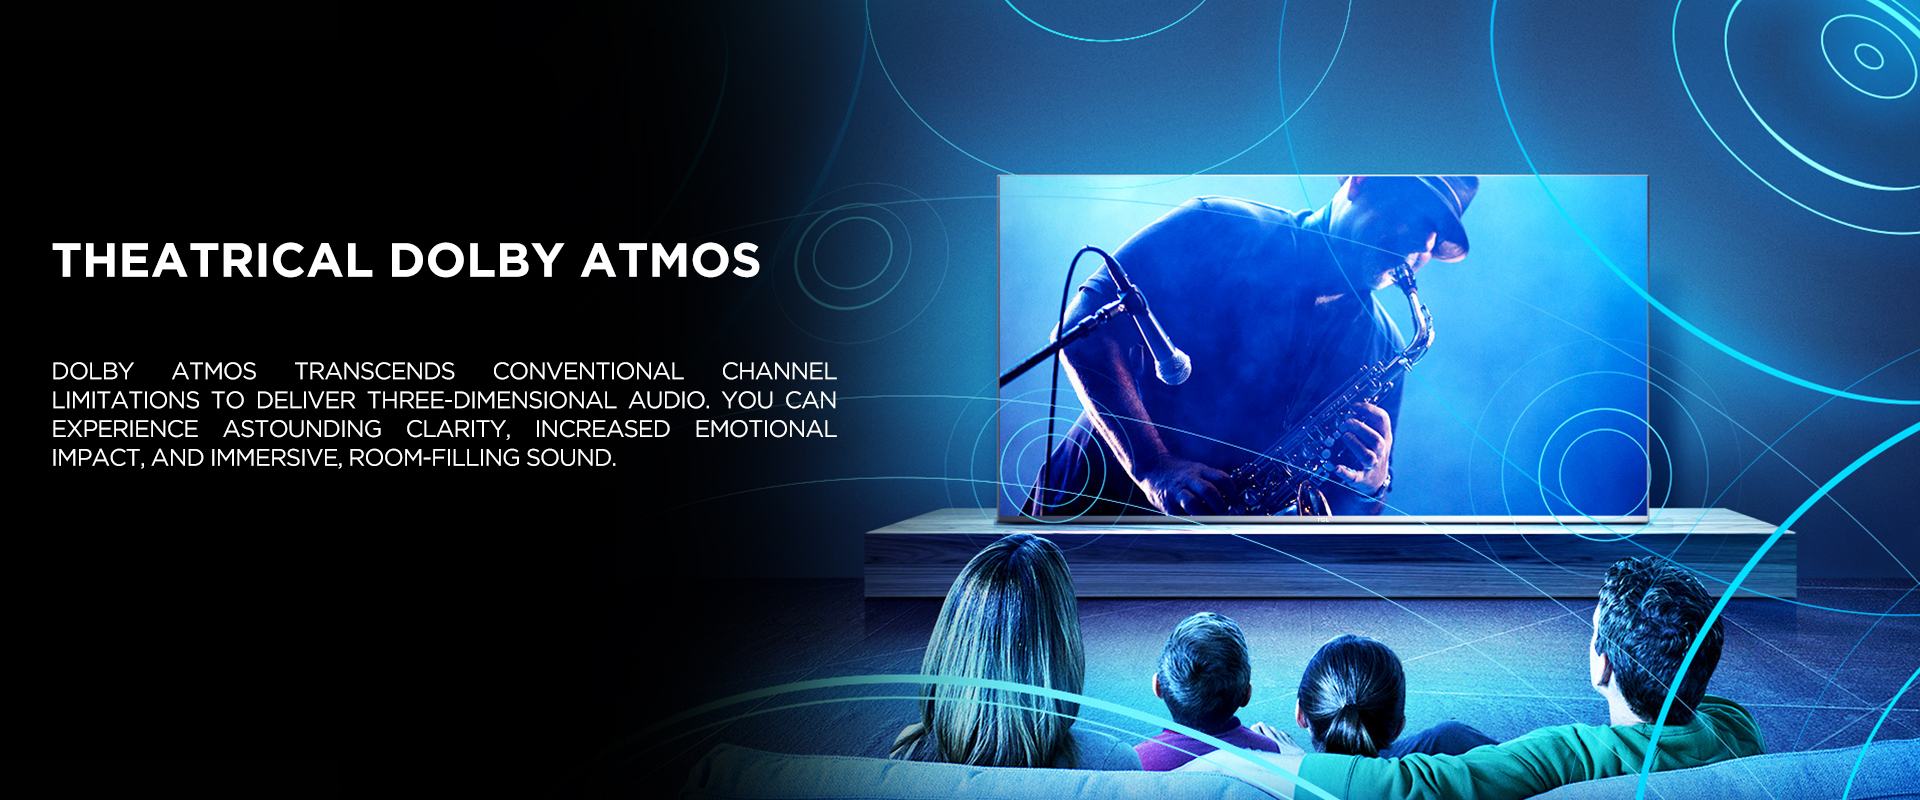 Theatrical Dolby Atmos - Dolby Atmos transcends conventional channel limitations to deliver three-dimensional audio. You can experience astounding clarity, increased emotional impact, and immersive, room-filling sound.
